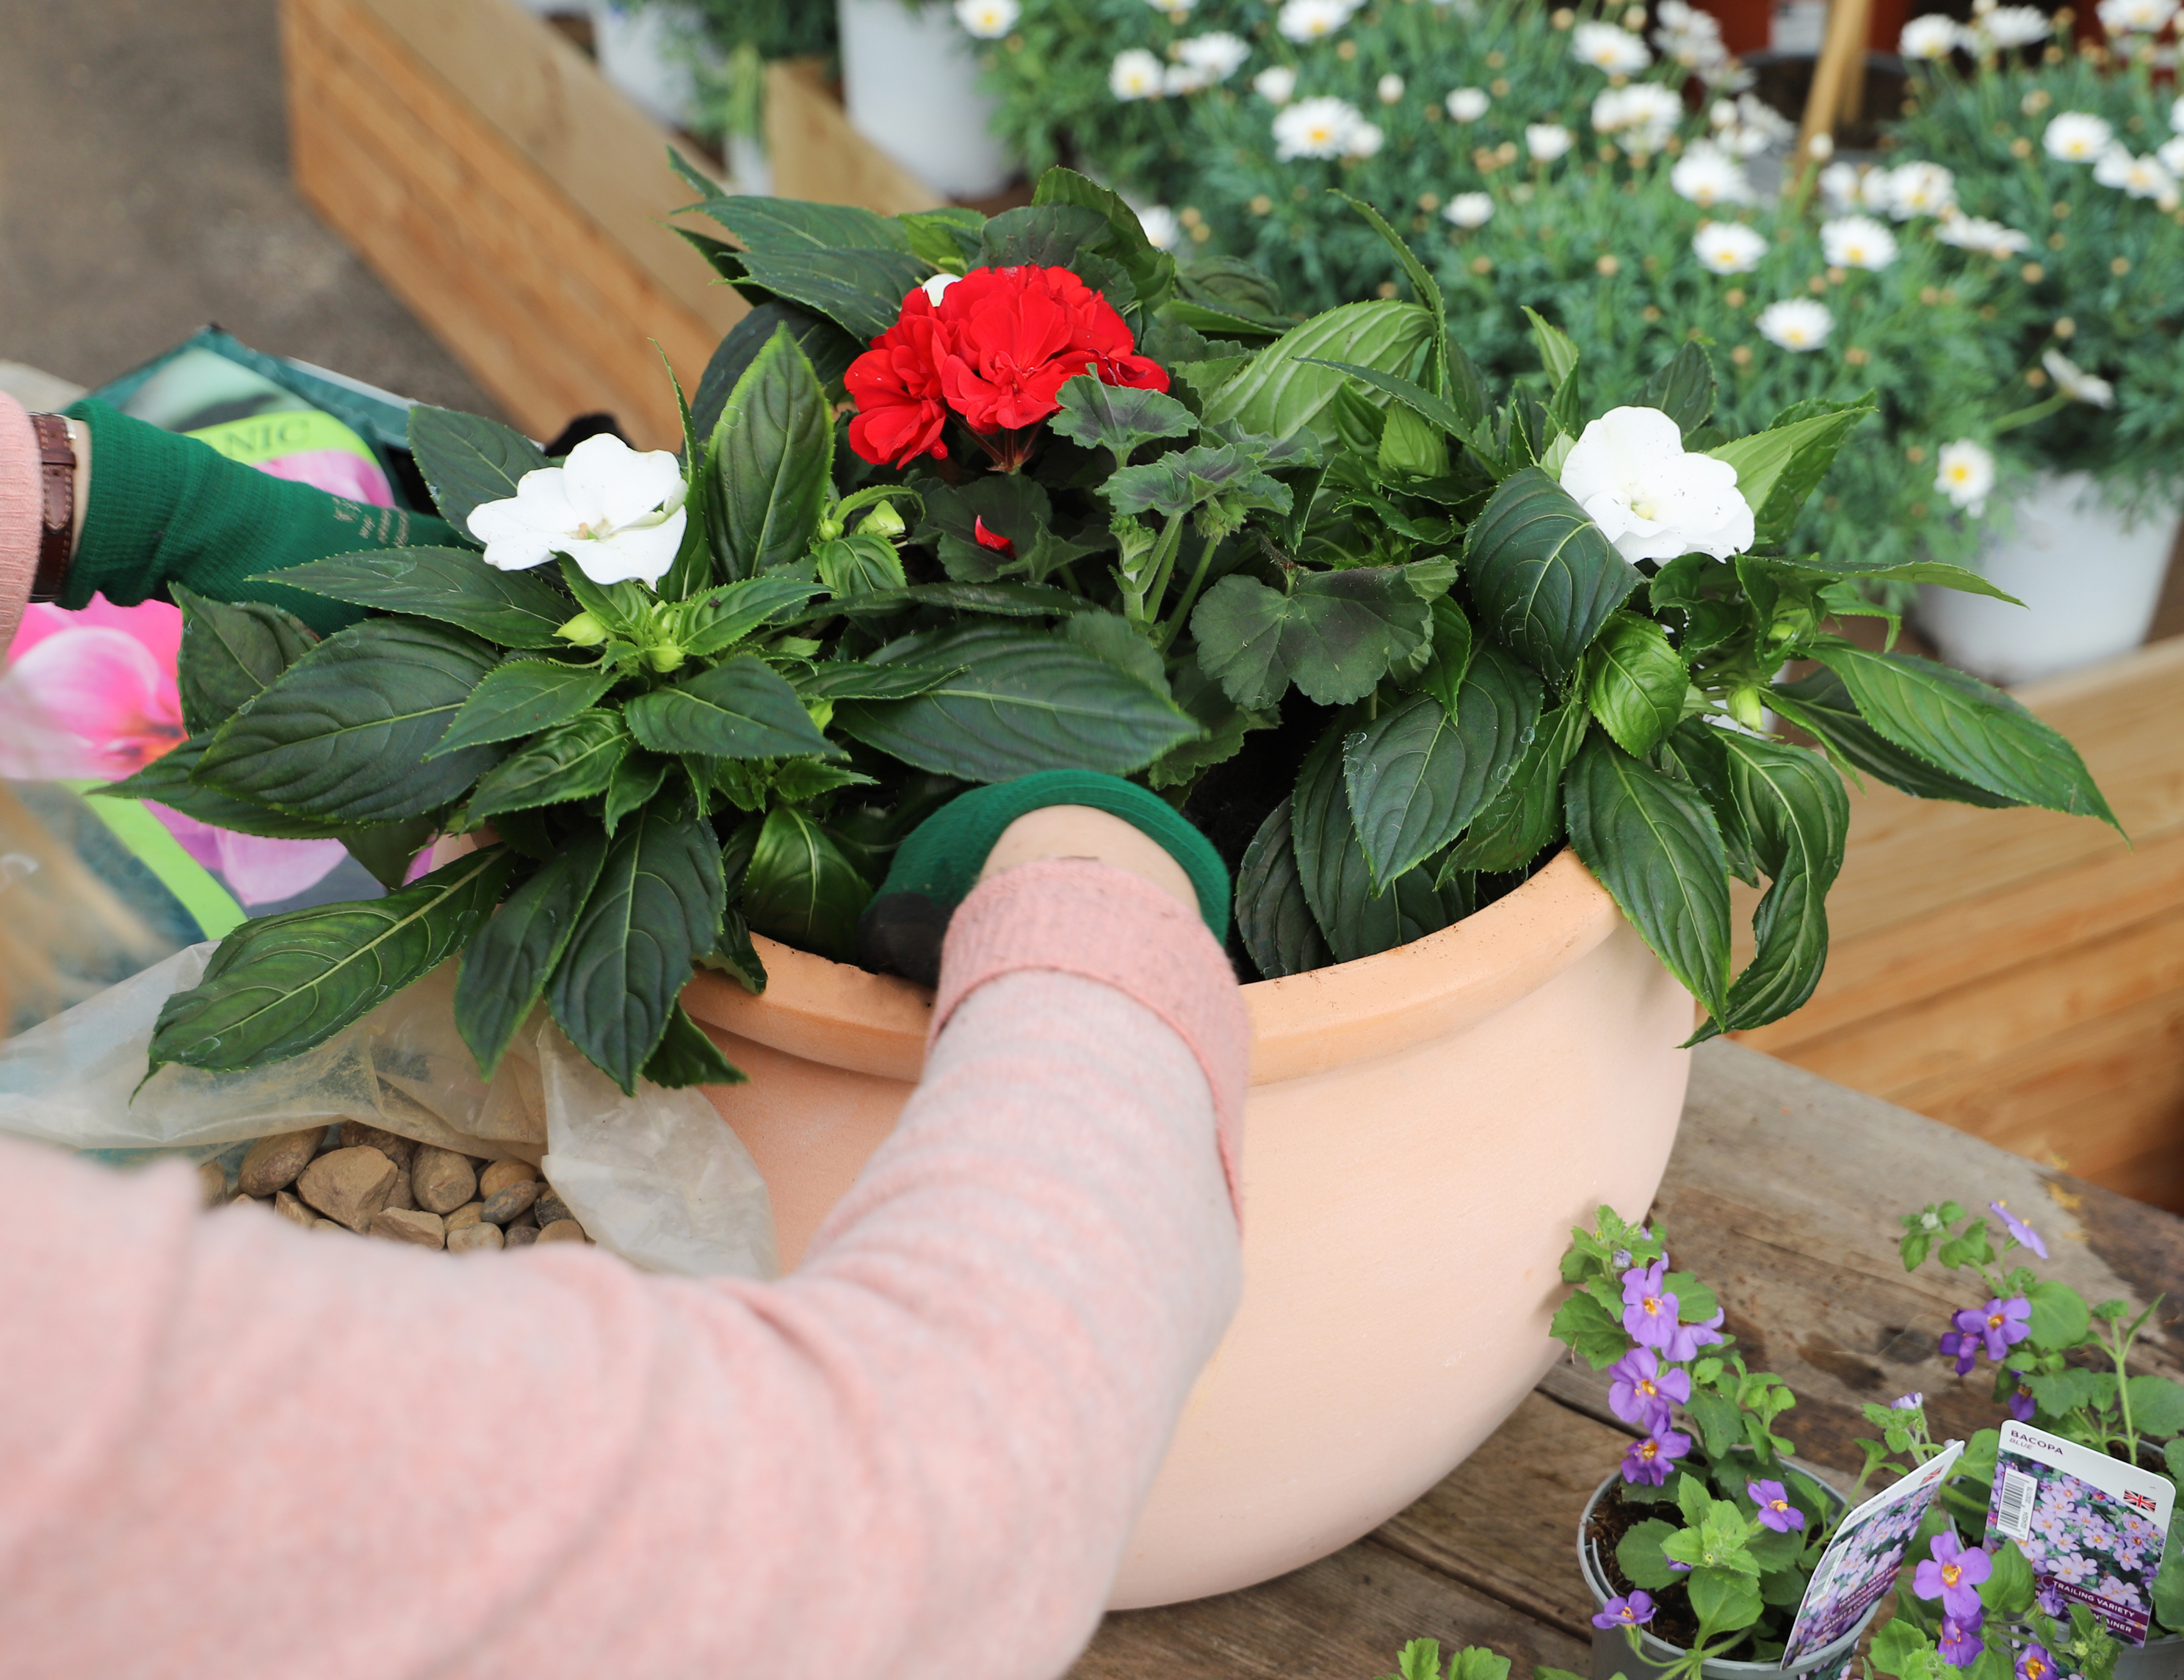 Filling a pot with red, white and blue flowerred plants (Squire's Garden Centres/PA)